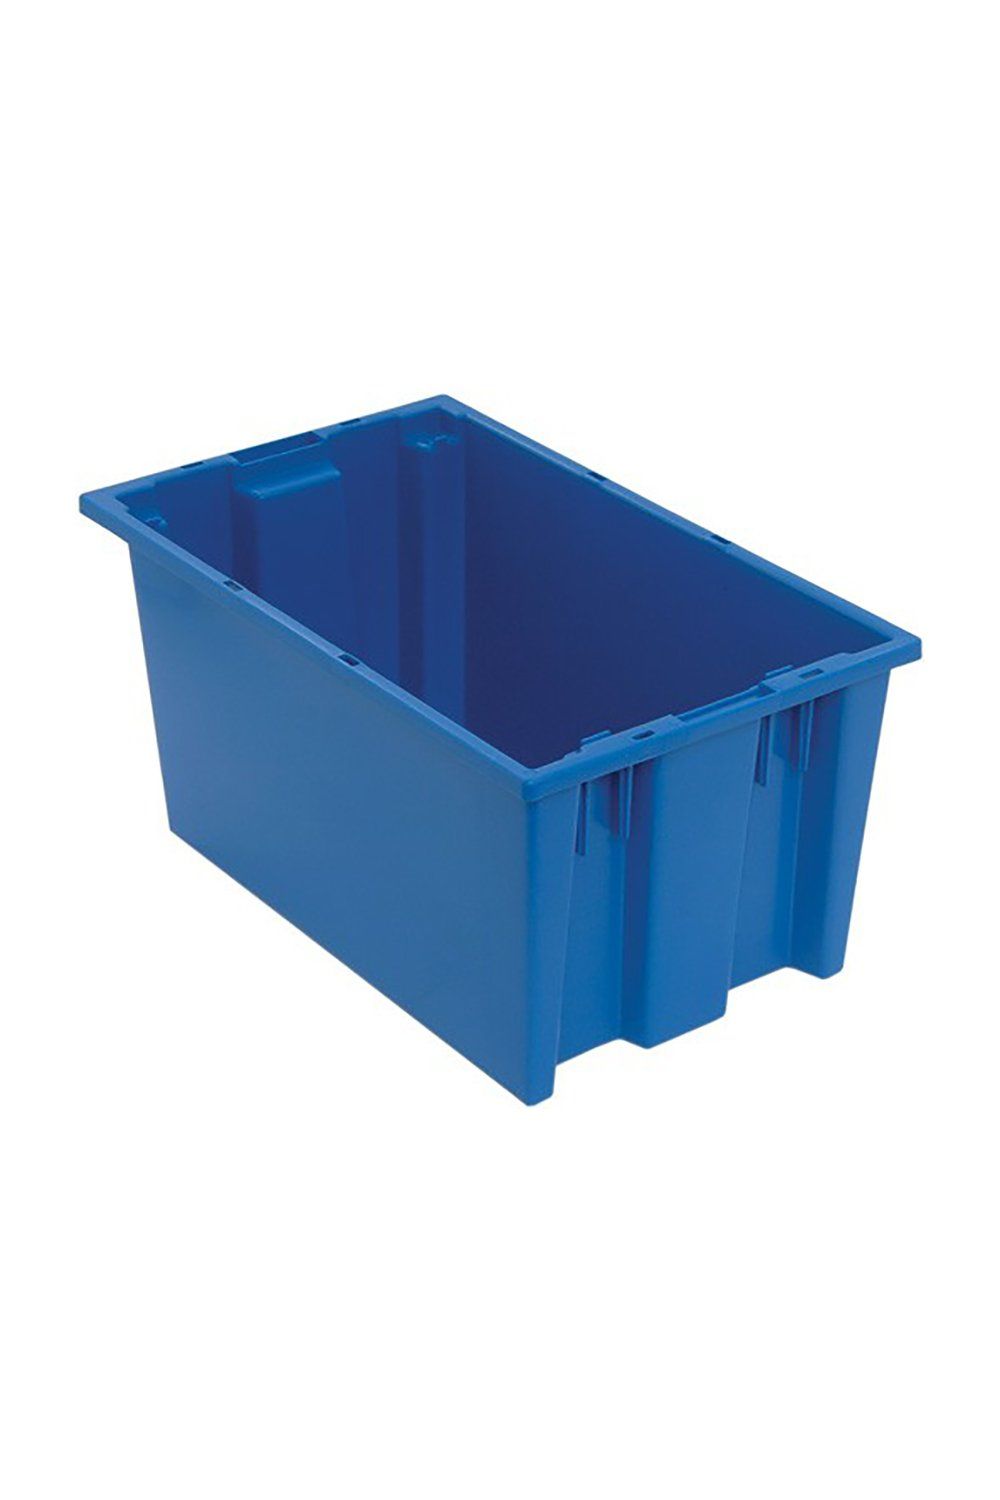 Stack and Nest Tote Bins & Containers Acart 18"L x 11"W x 9"H Blue 